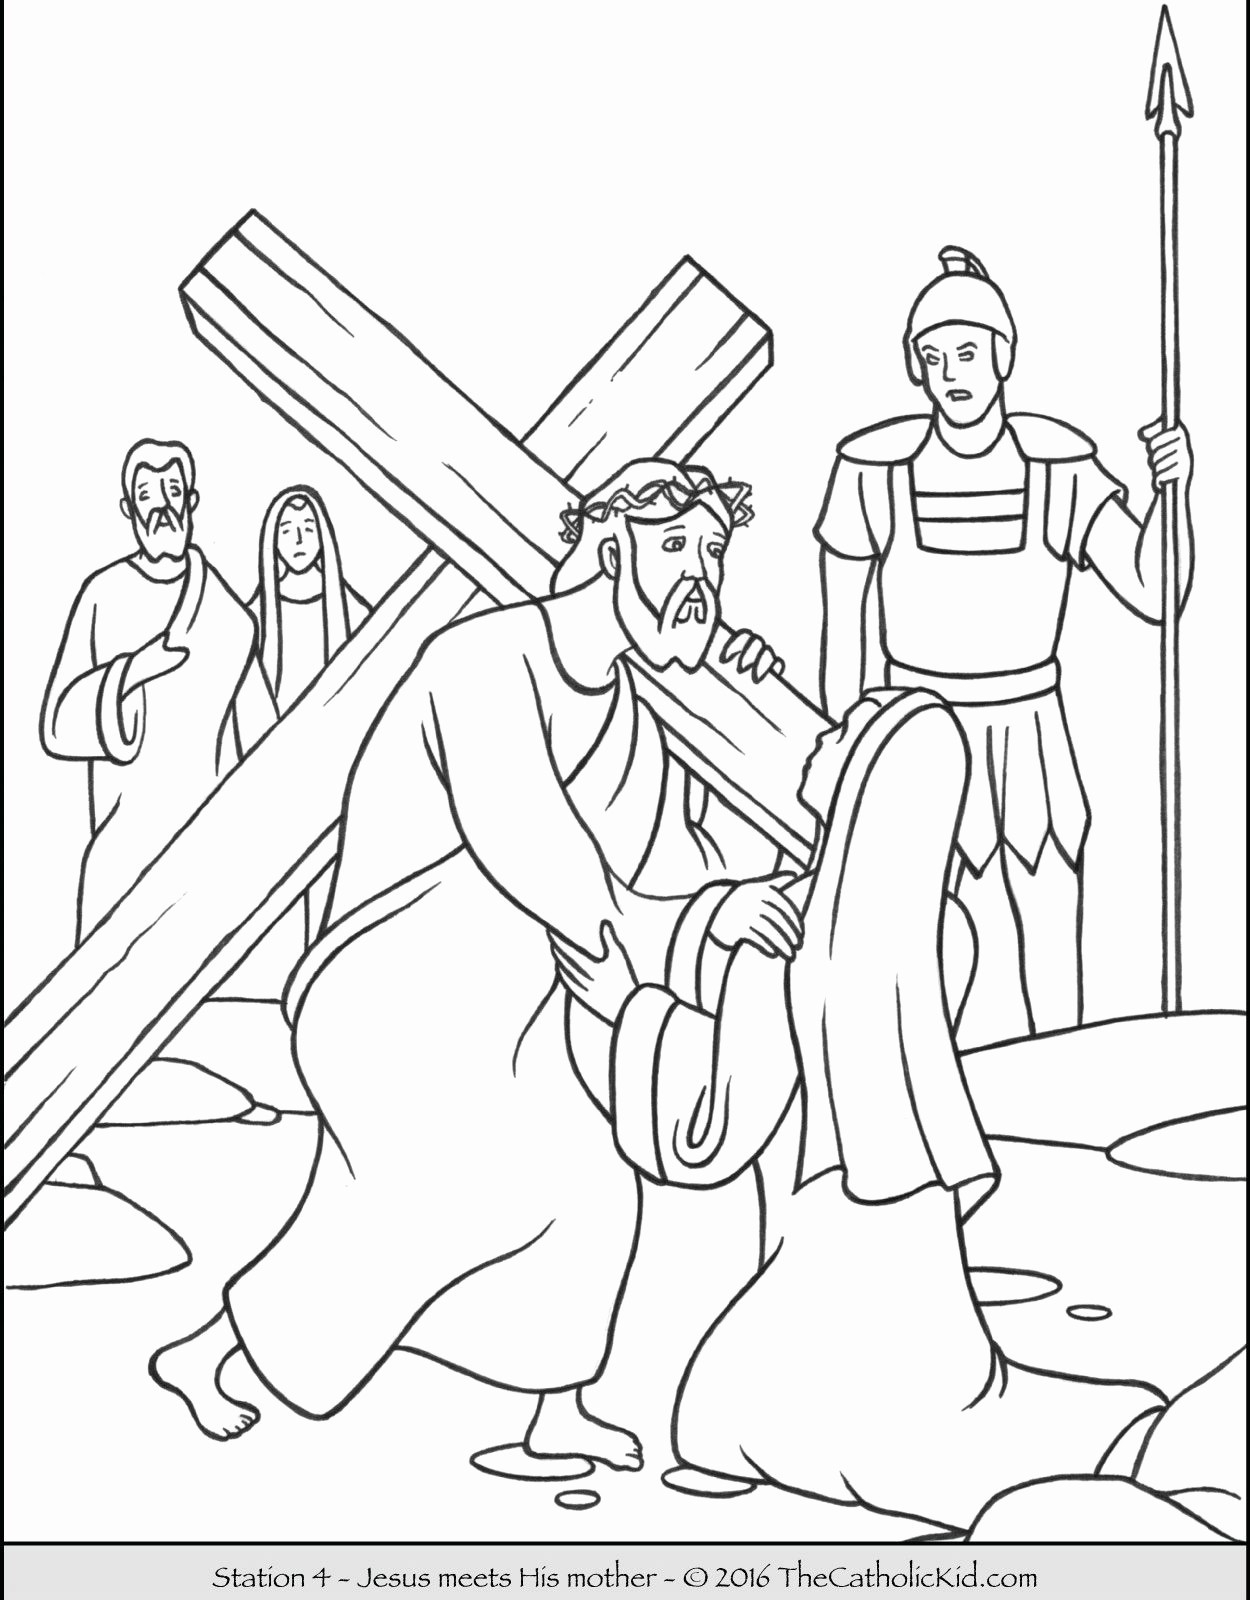 Names Of Jesus Coloring Page Coloring Design Coloring Design Jesus Pages Photo Ideas Page Of